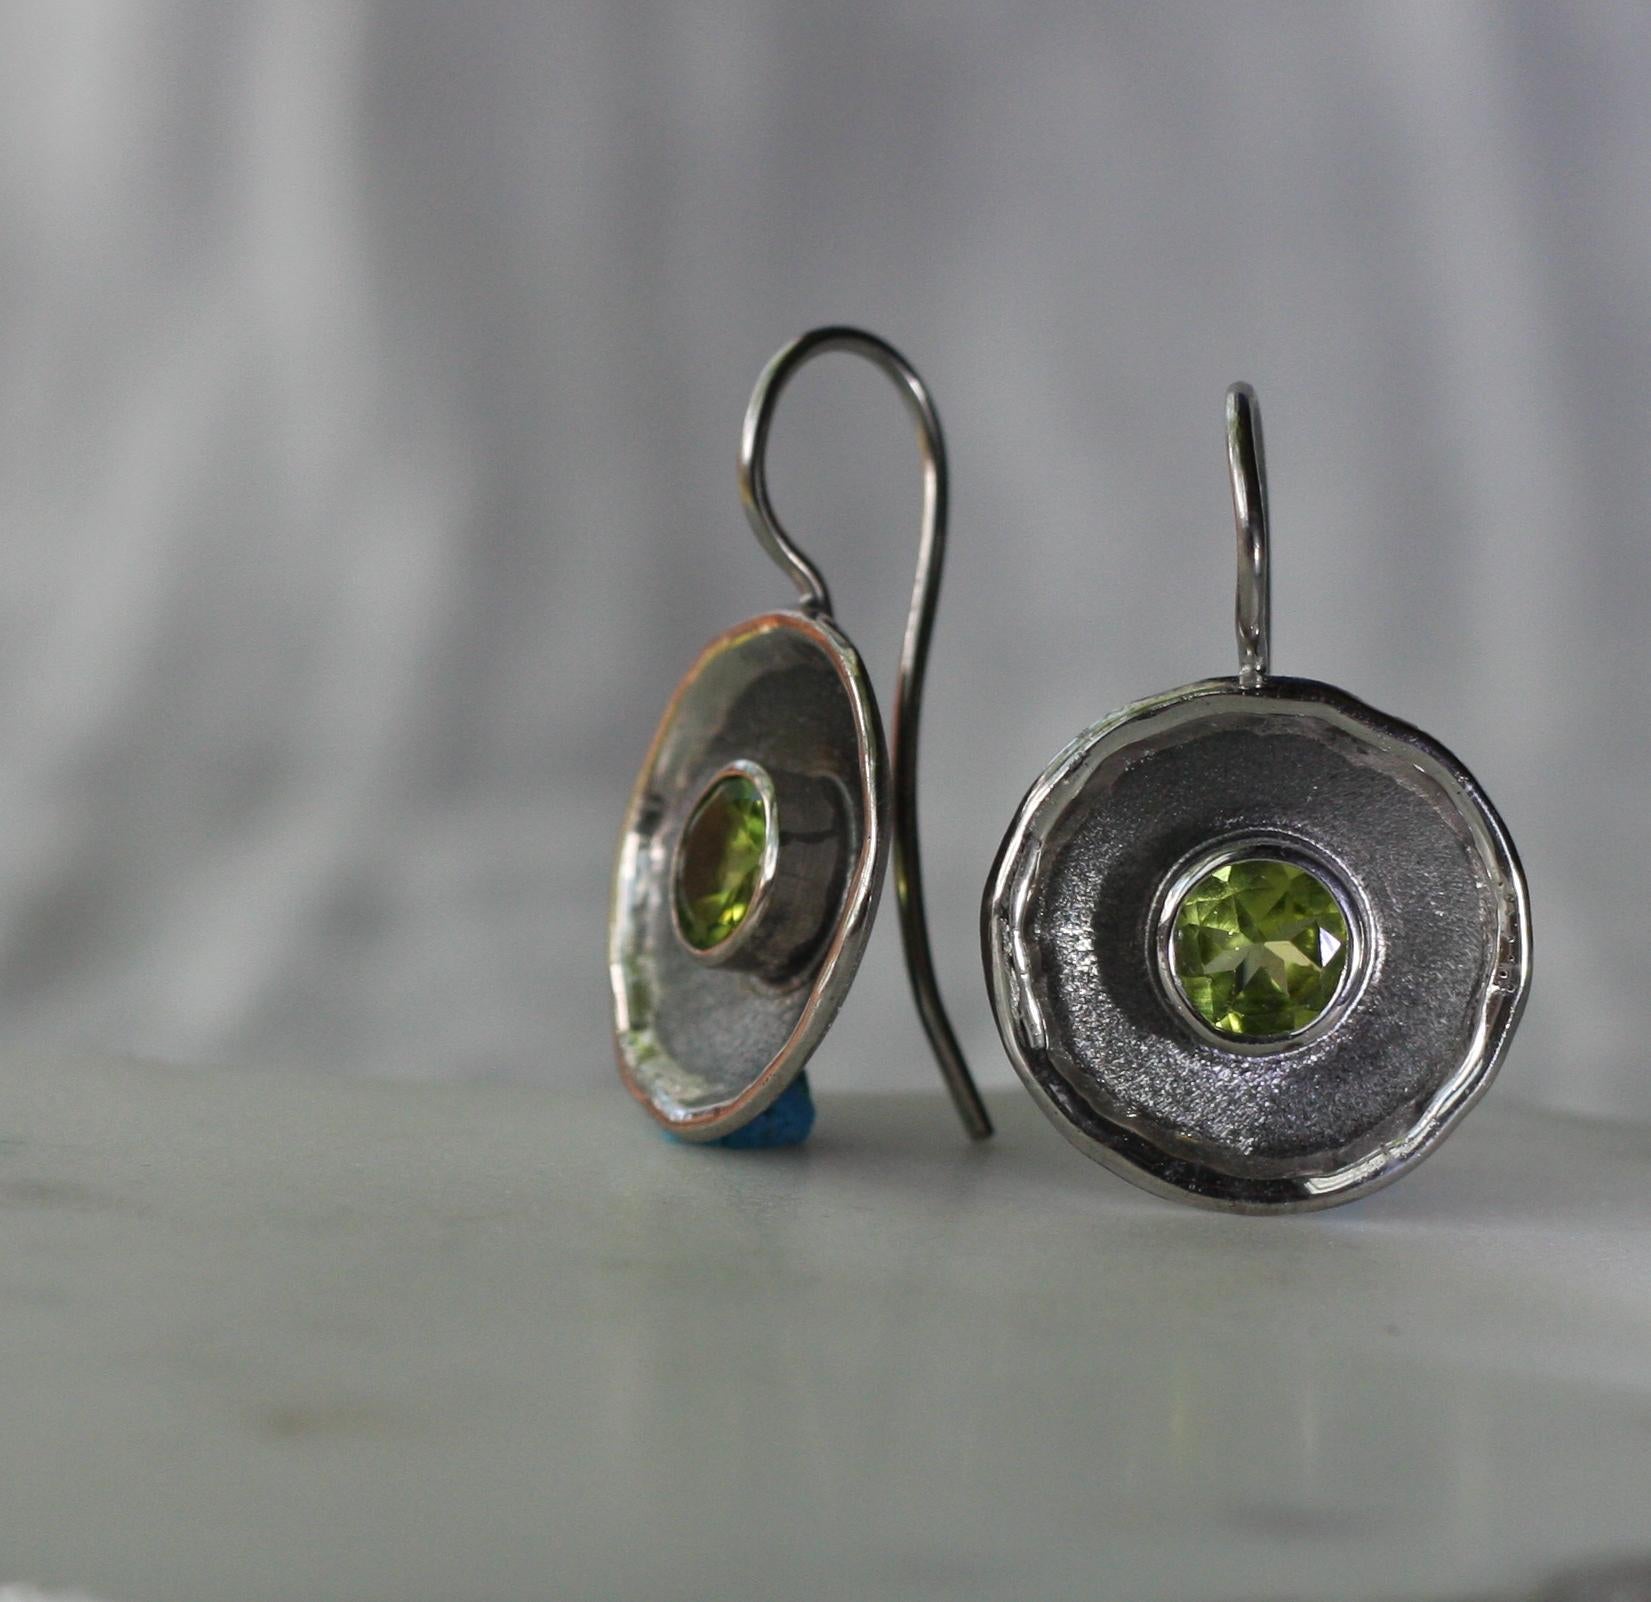 Yianni Creations presents earrings from Hephestos Collection. These earrings are all handcrafted from Fine Silver 950 purity and plated with palladium to protect against tarnish. Each earring features 1.25 Carat Peridot complemented by unique